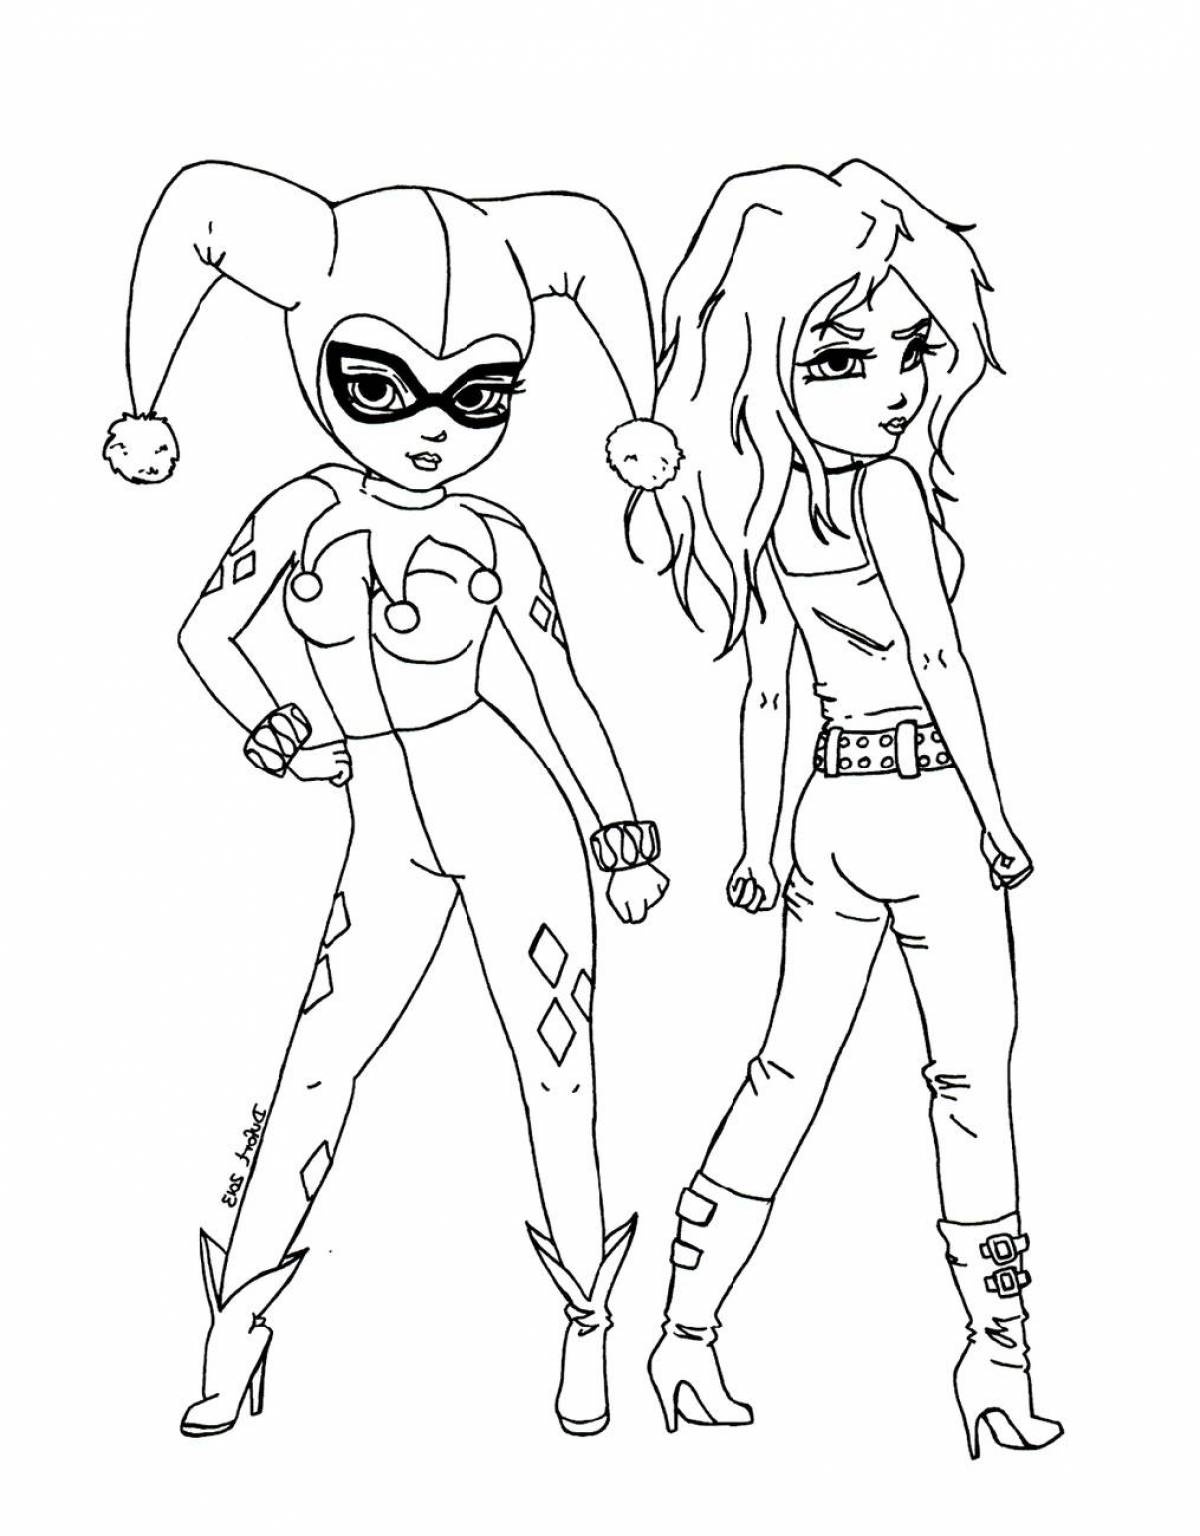 Harley quinn playful coloring page